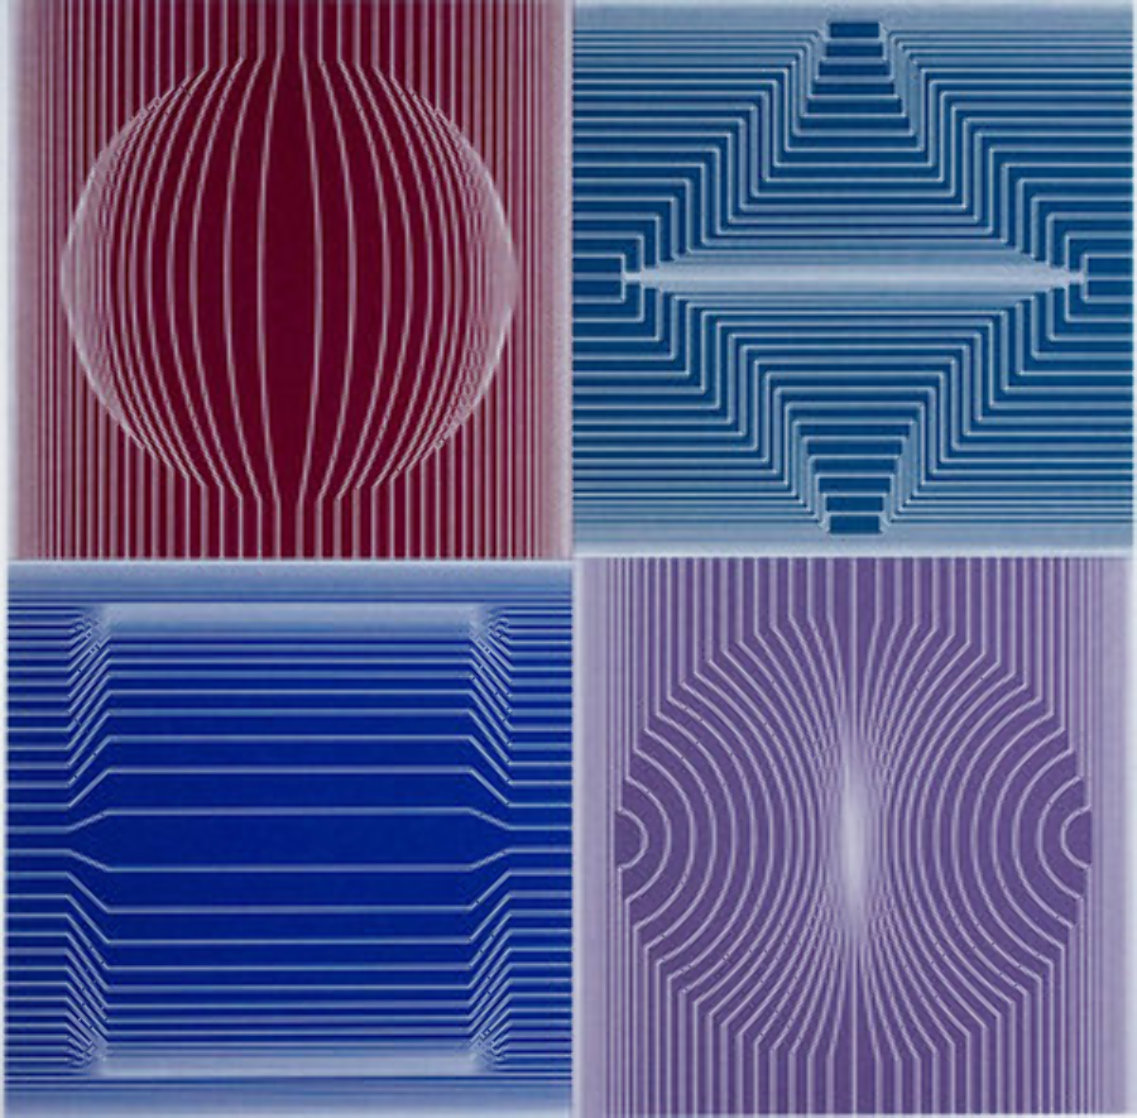 Tokyo 1982 Limited Edition Print by Victor Vasarely